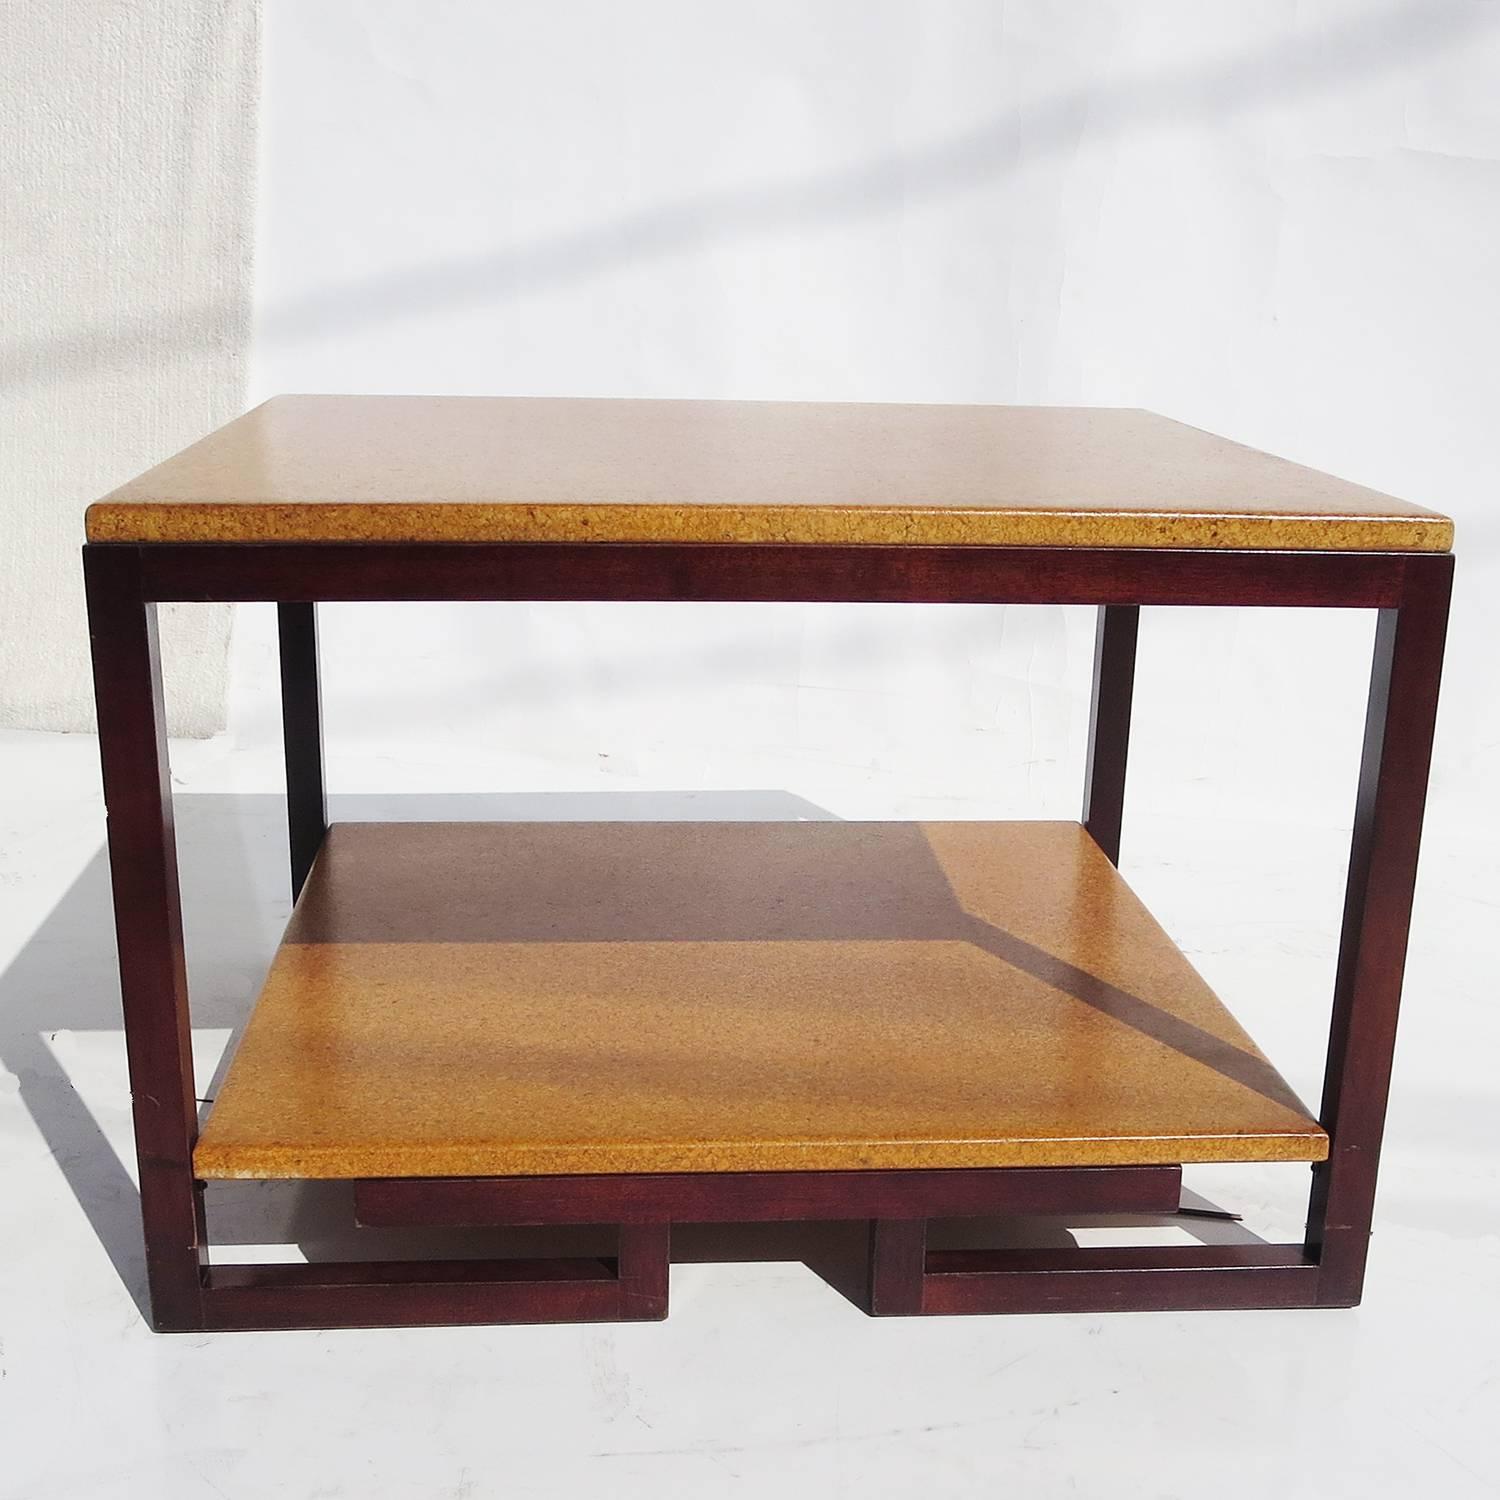 Paul Frankl, the prominent American furniture designer, became first known for his vertical skyscraper influenced furniture of New York. He later moved to California, and embraced a more horizontal palette for the Johnson Furniture Company. He